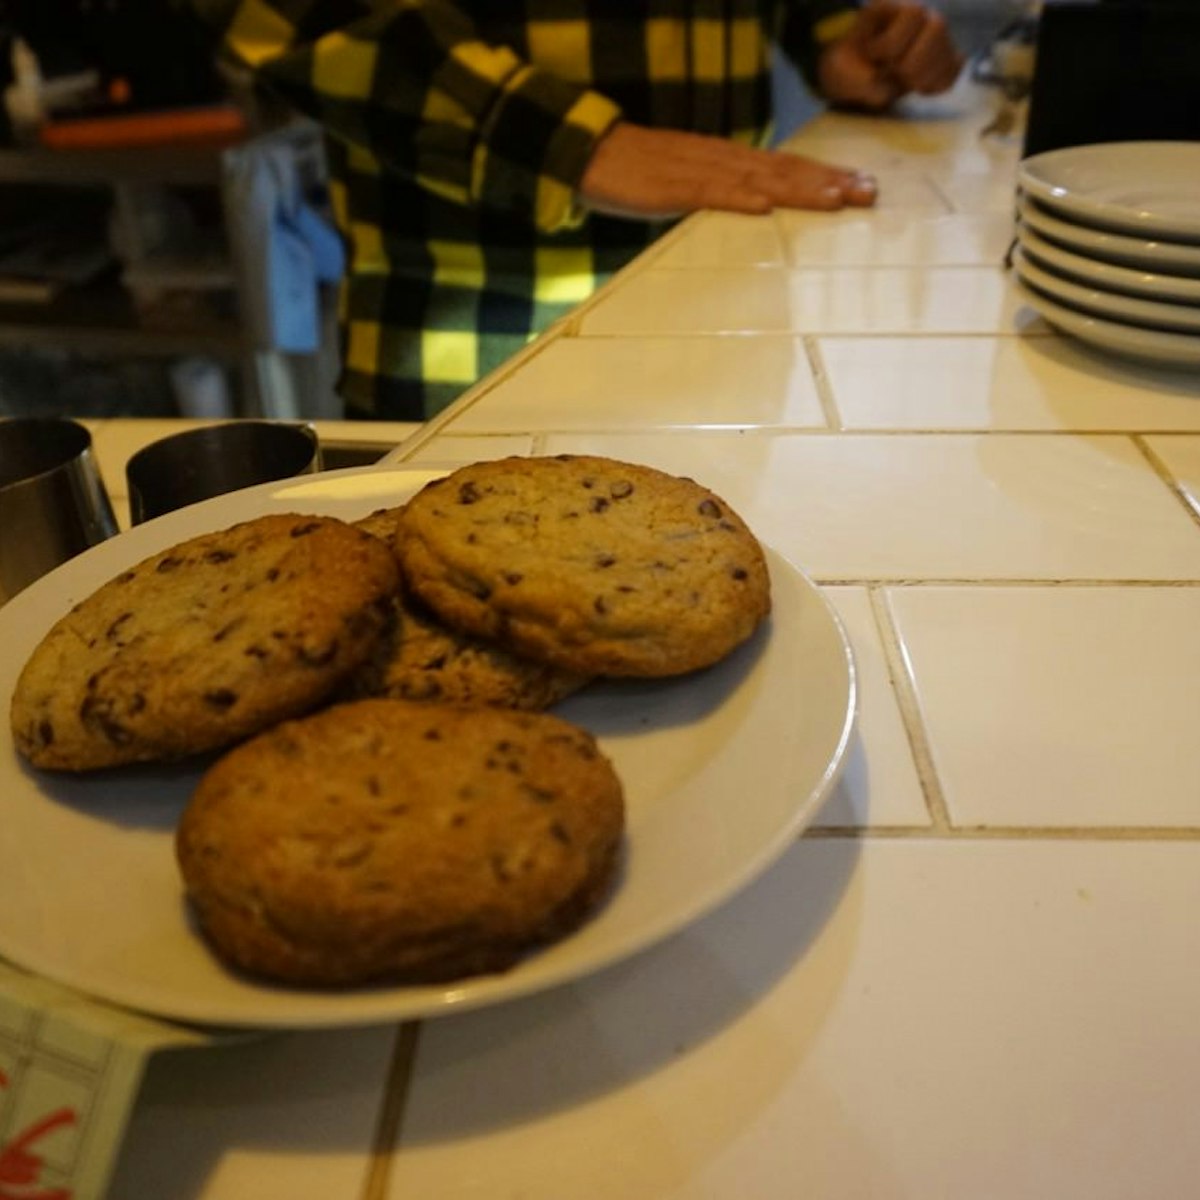 Some of the delicious cookies at Coffee & Kicks.